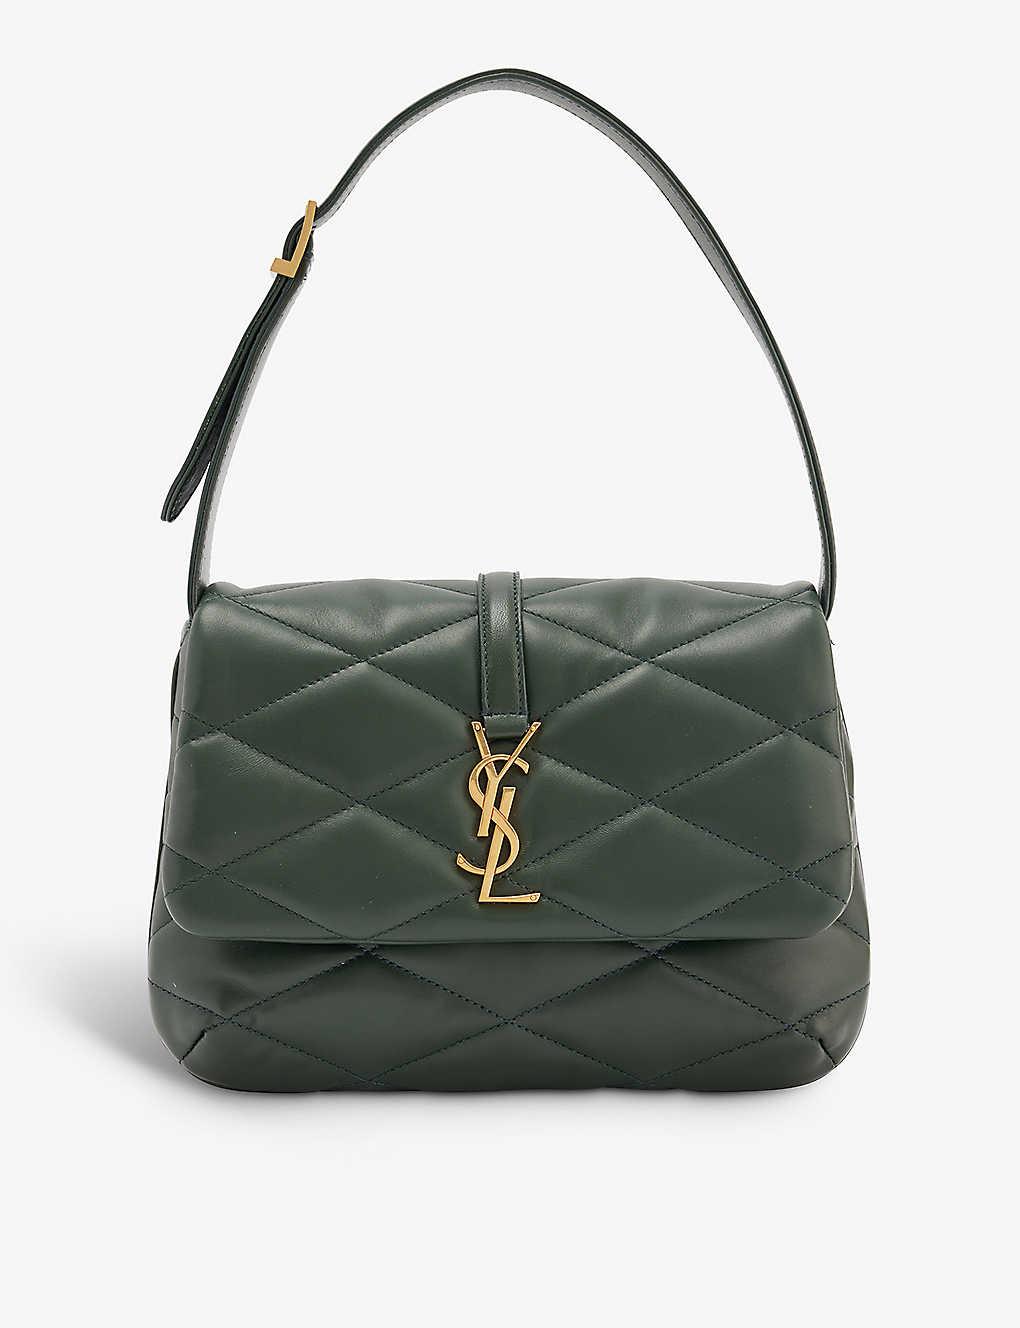 Saint Laurent Mono Quilted Leather Shoulder Bag in Green | Lyst